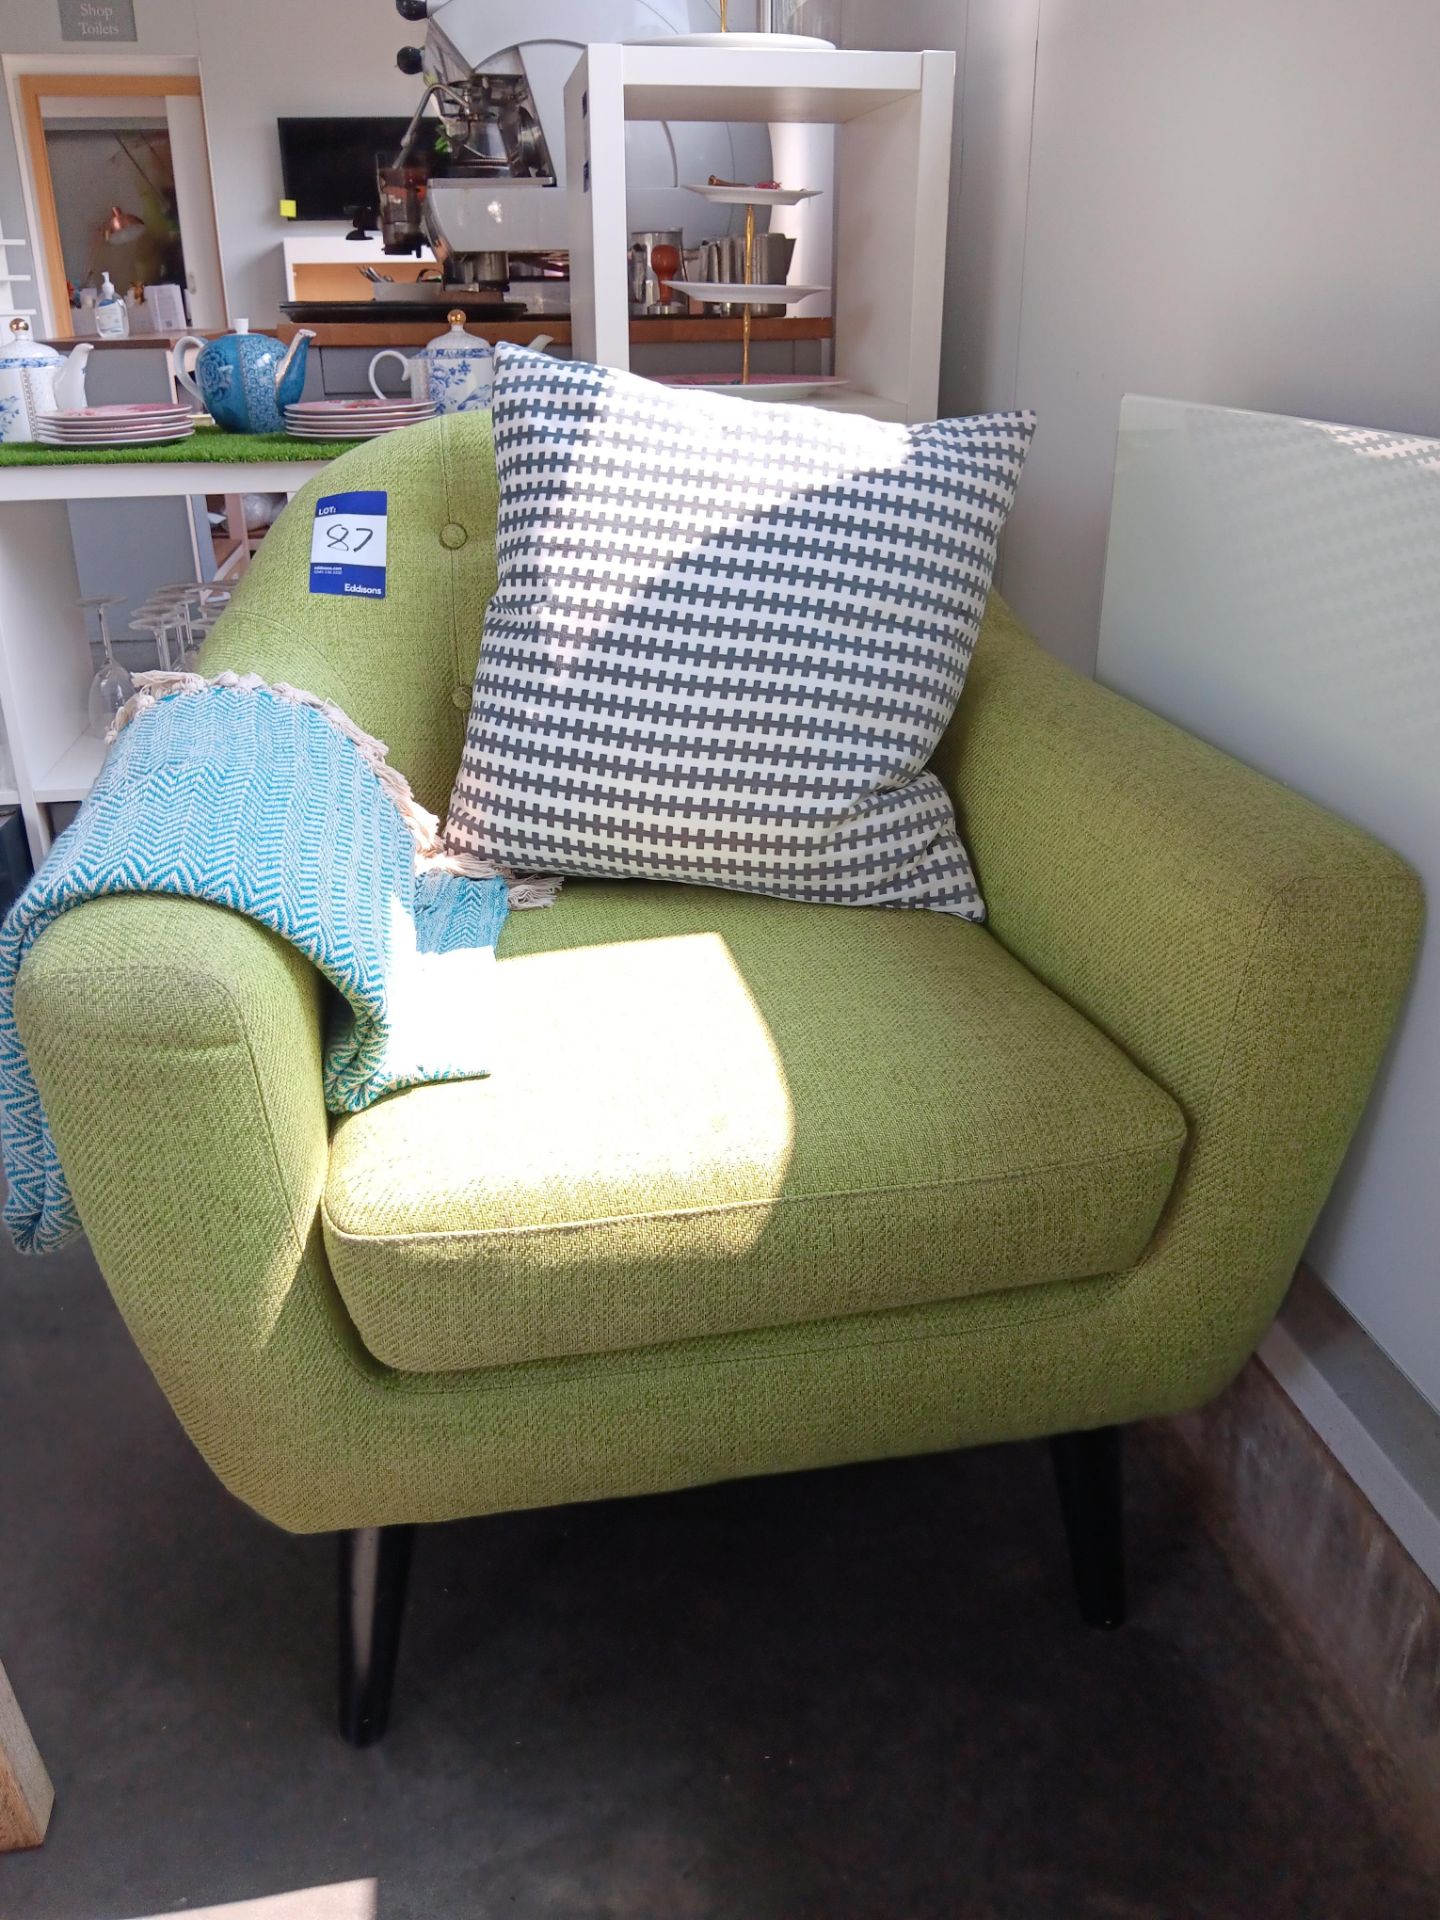 Armchair with green cloth upholstery